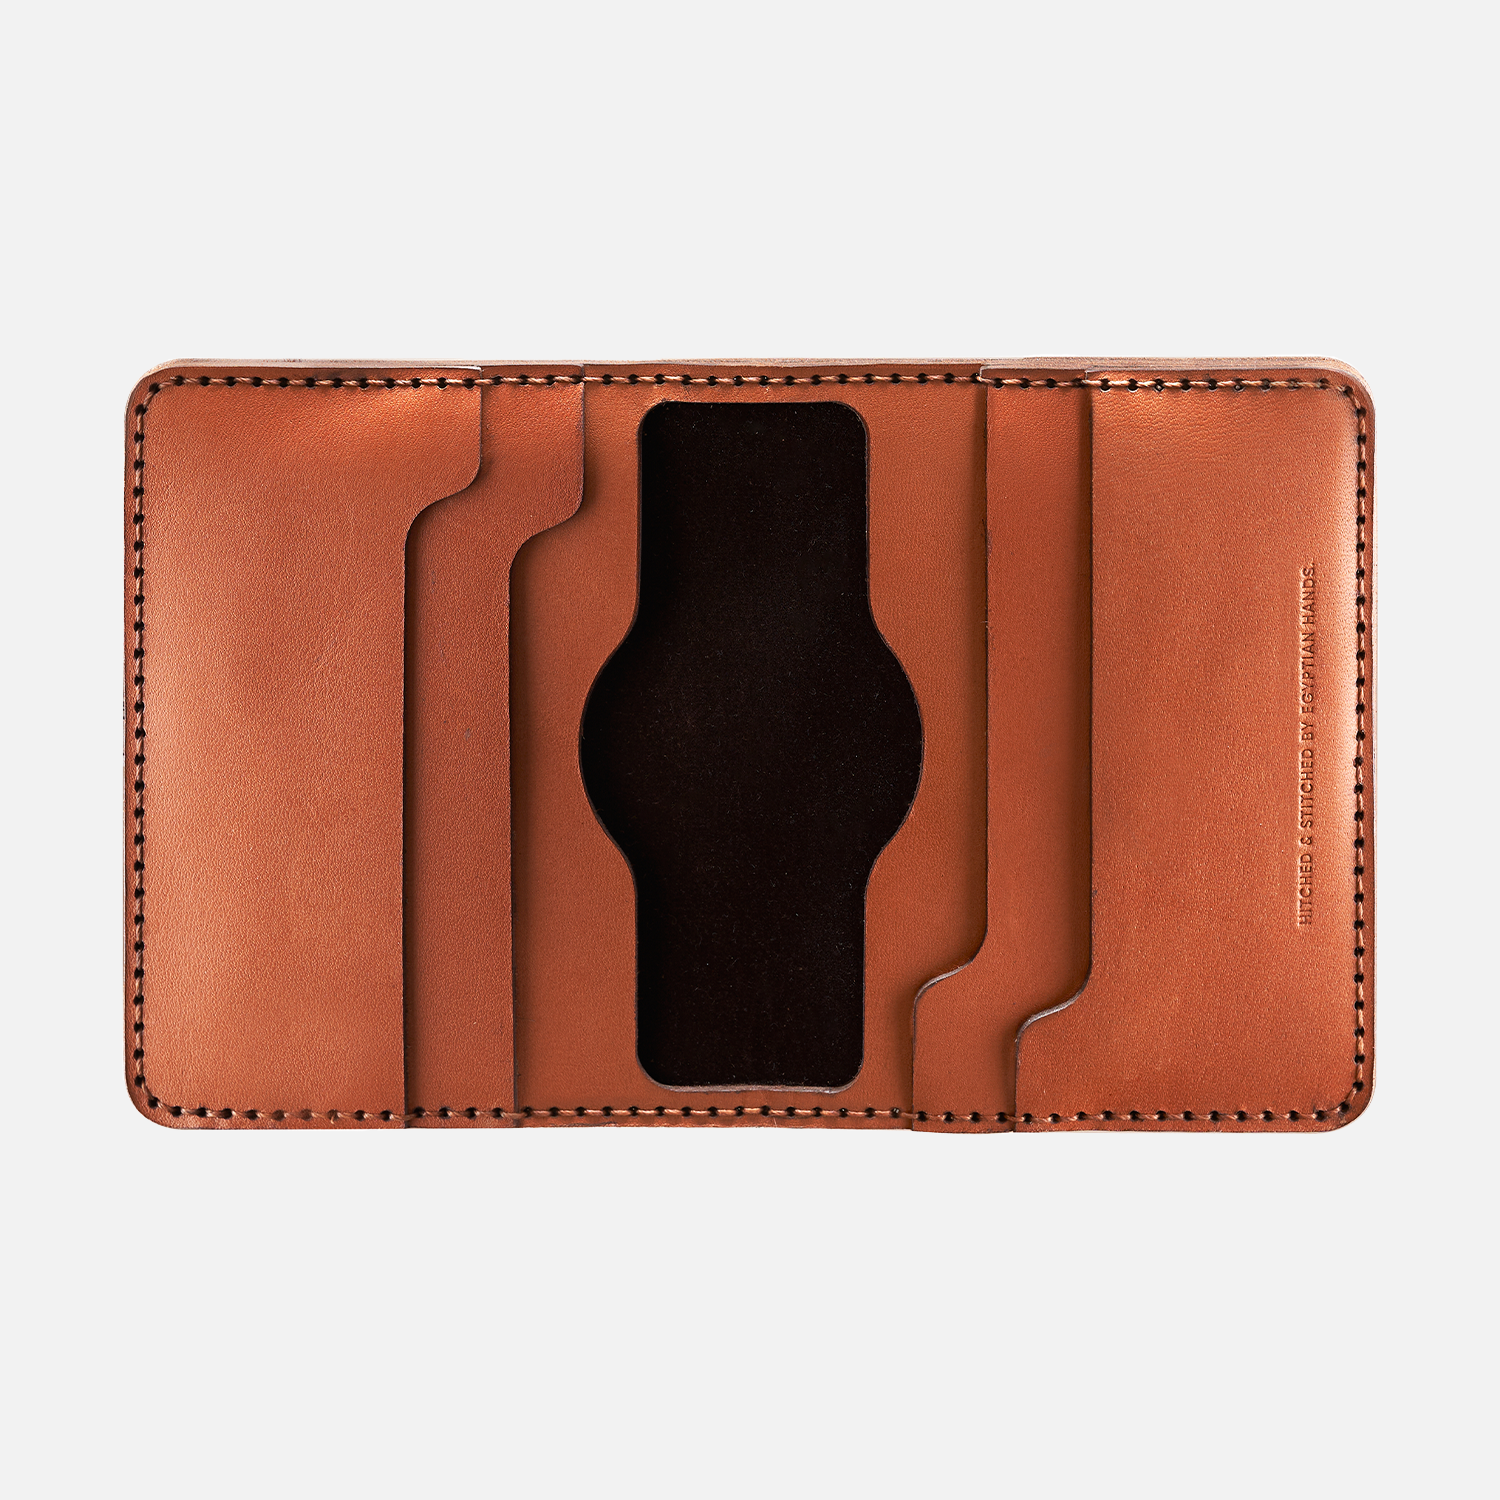 Tan leather bifold wallet interior with card slots on white background.